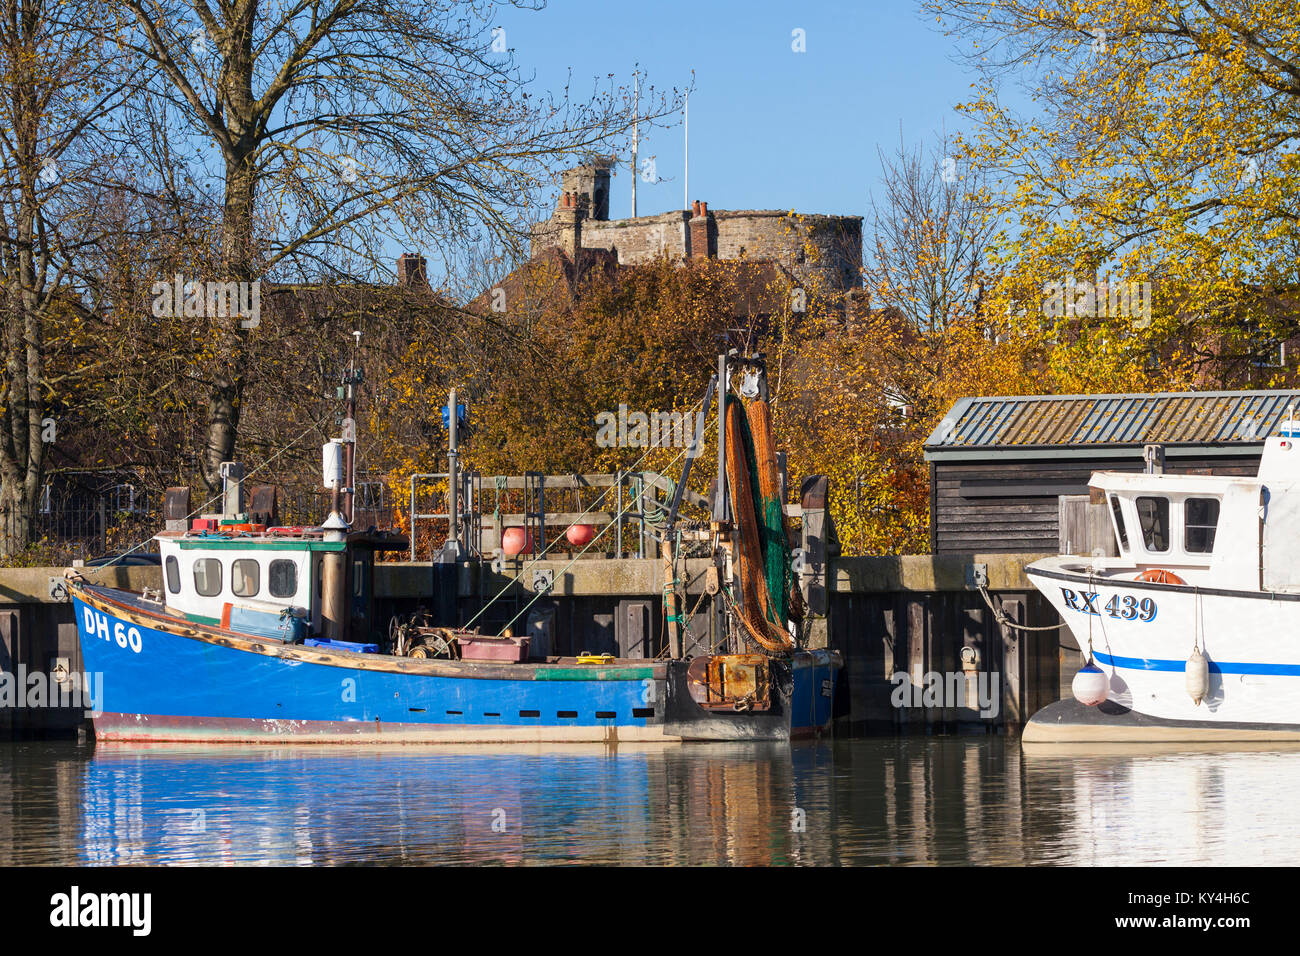 Fishing boats trawlers, moored on the river Rother in Rye, east sussex, uk Stock Photo